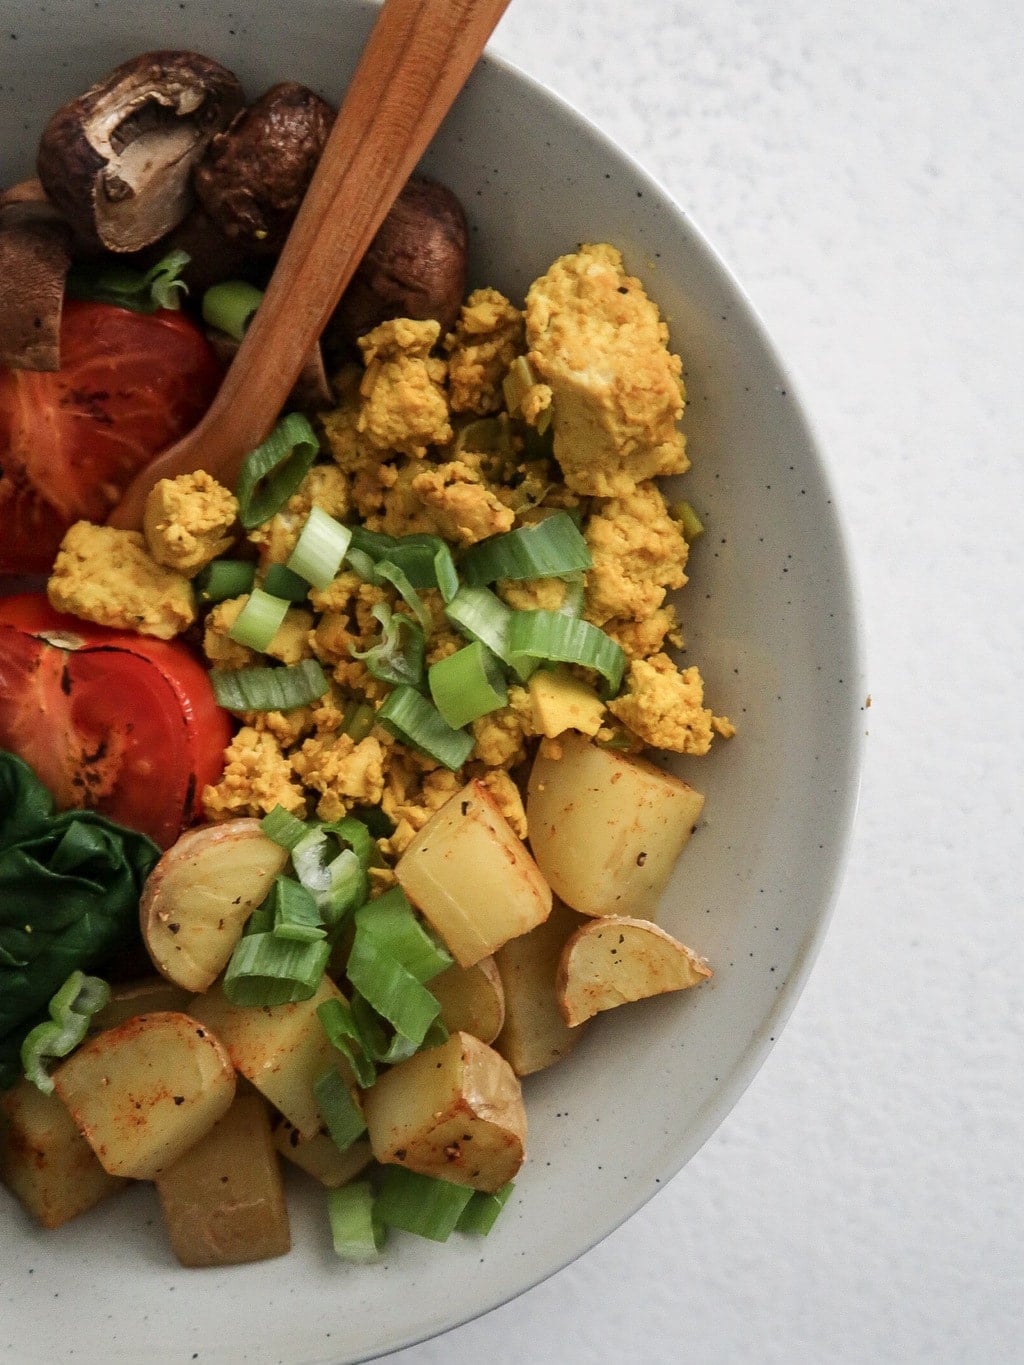 Tofu scramble in bowl with potatoes, green onions, mushrooms and tomatoes with spoon.